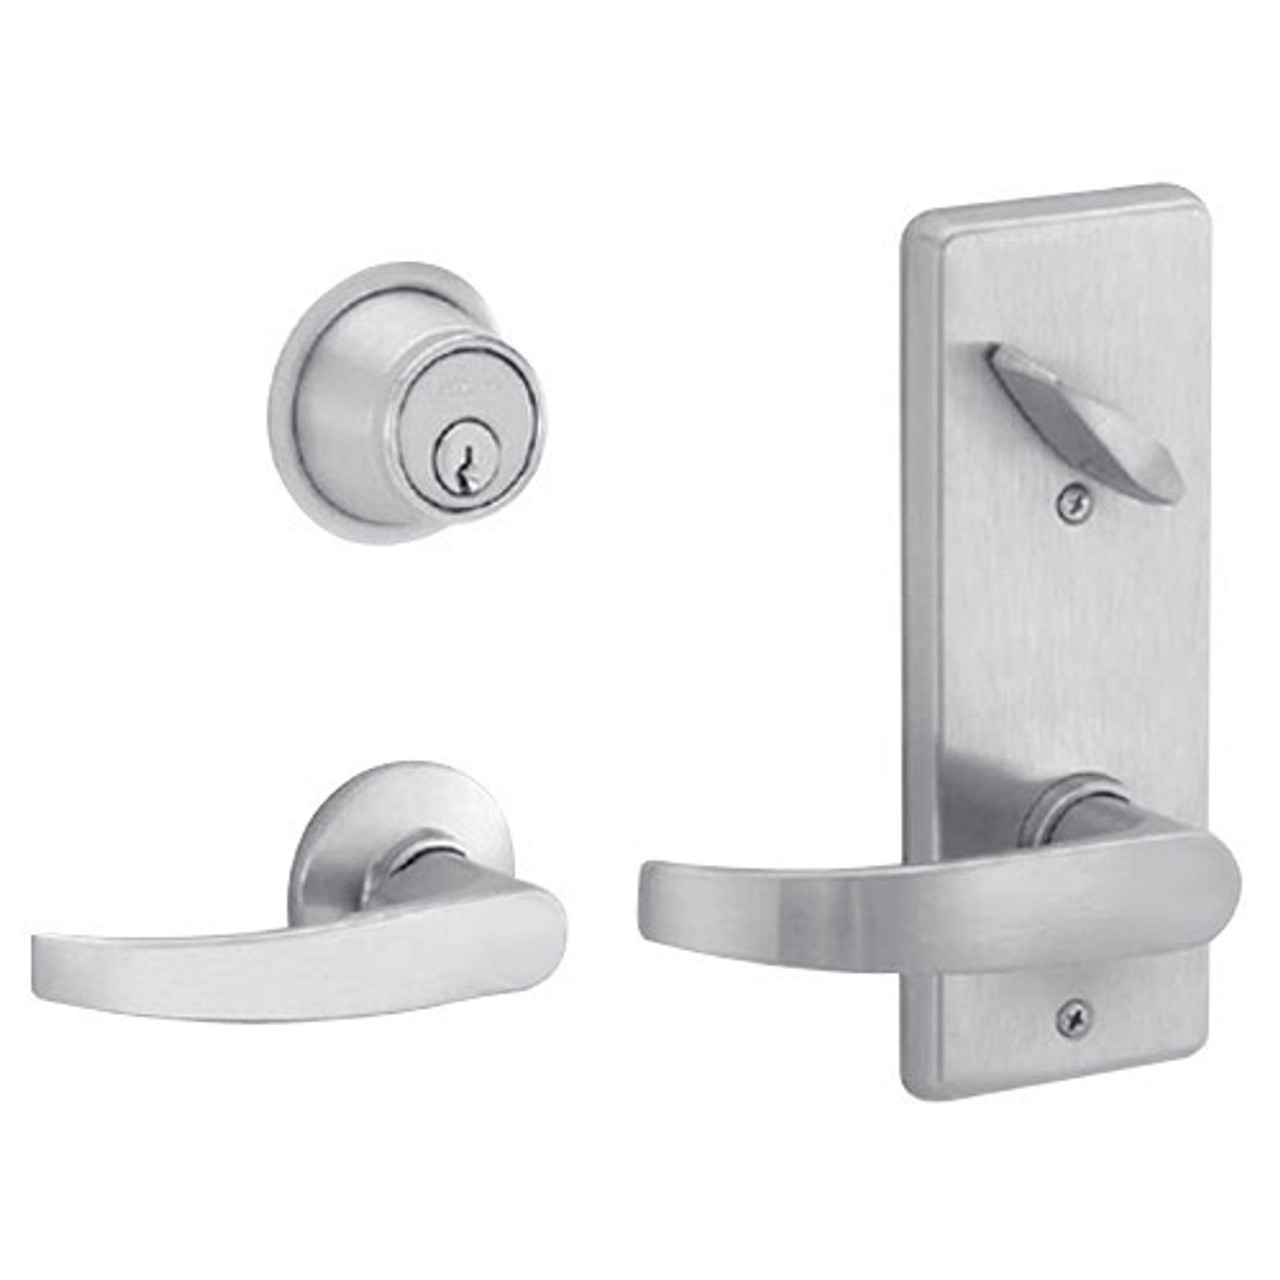 S210PD-NEP-619 Schlage S210PD Neptune Style Interconnected Lock in Satin Nickel